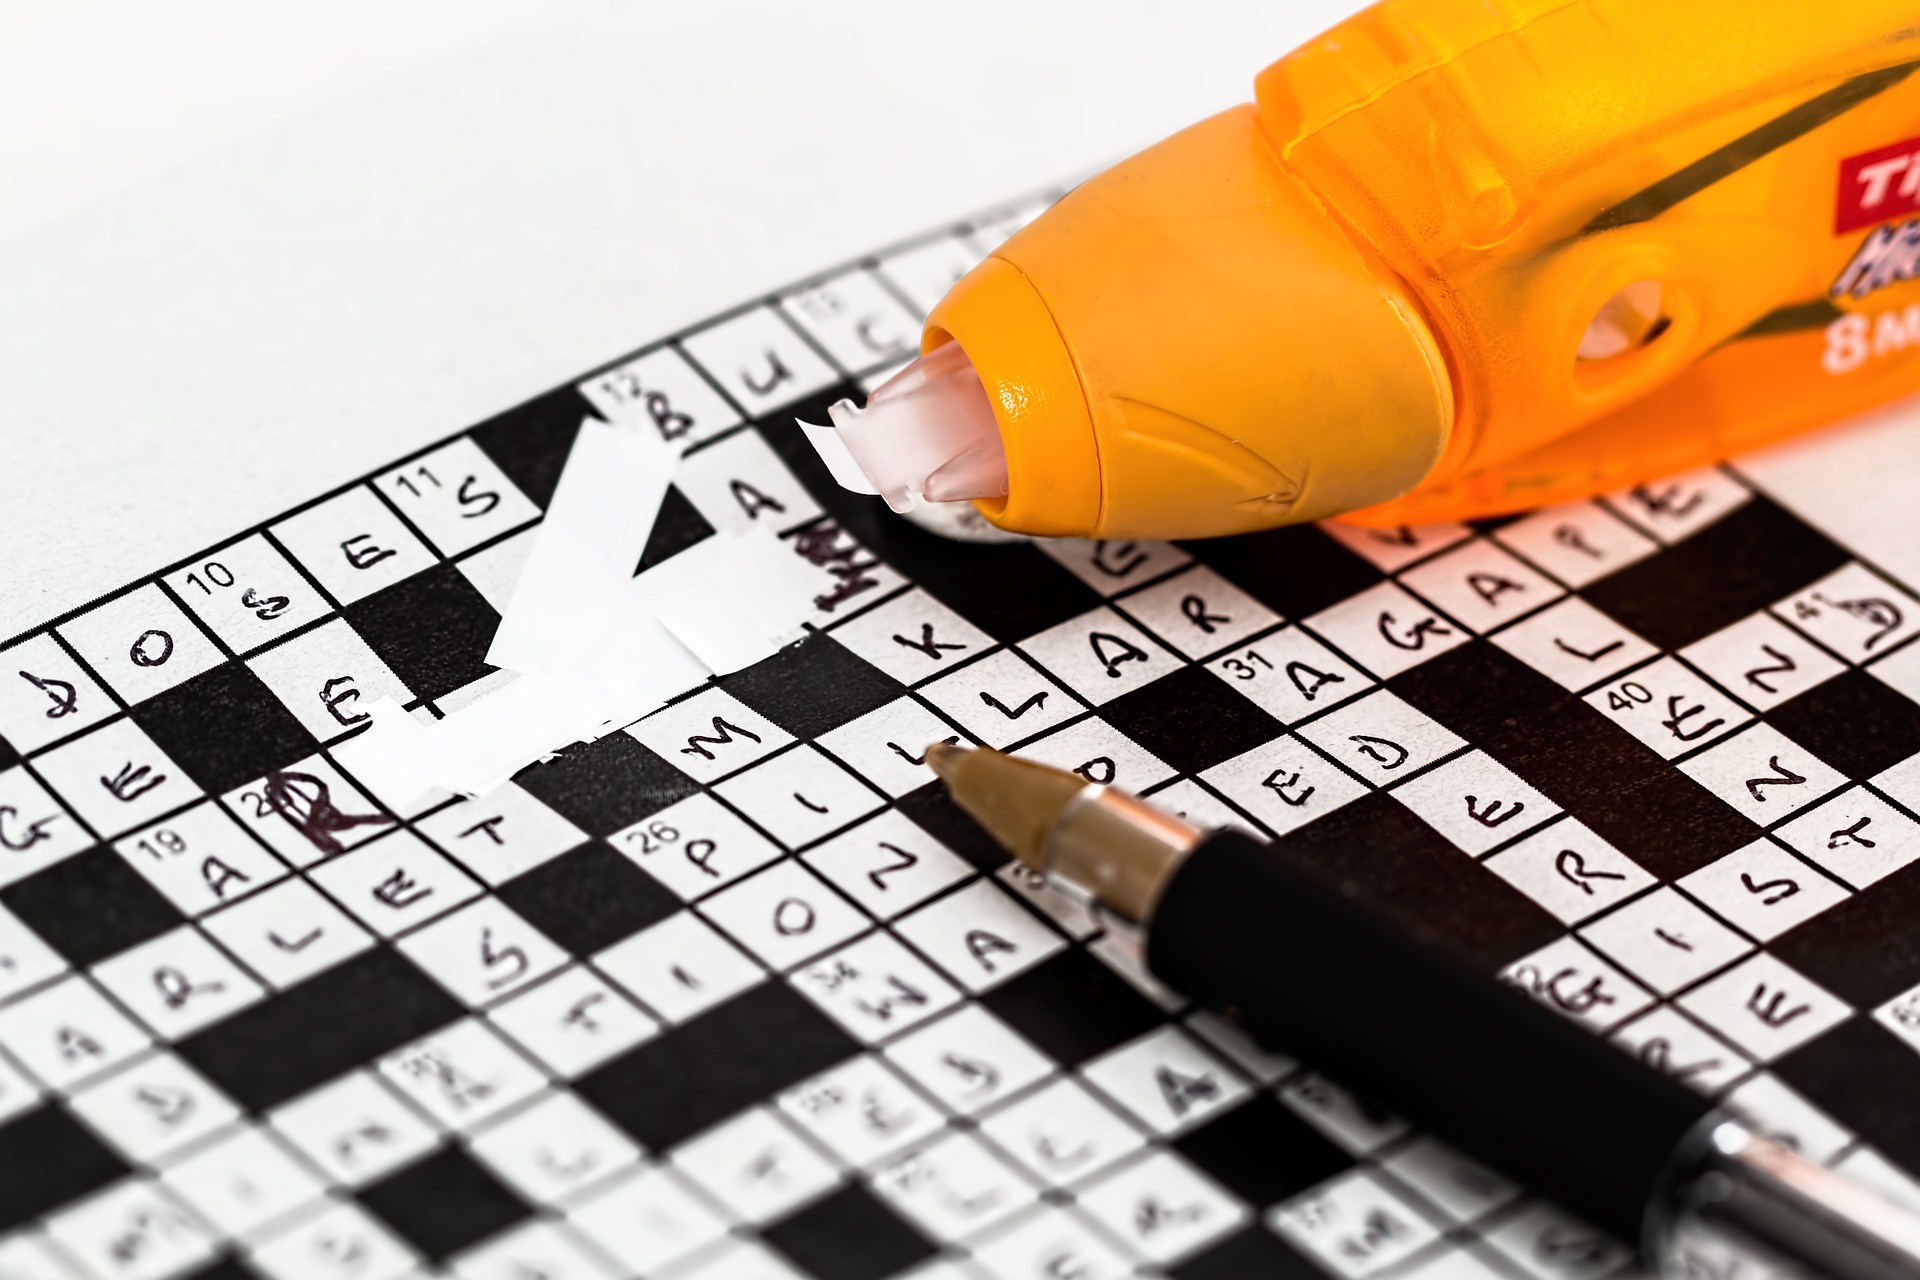 Someone whiting out a mistake in a crossword puzzle, published to: "25+ Common SEO Mistakes Small Businesses Make"